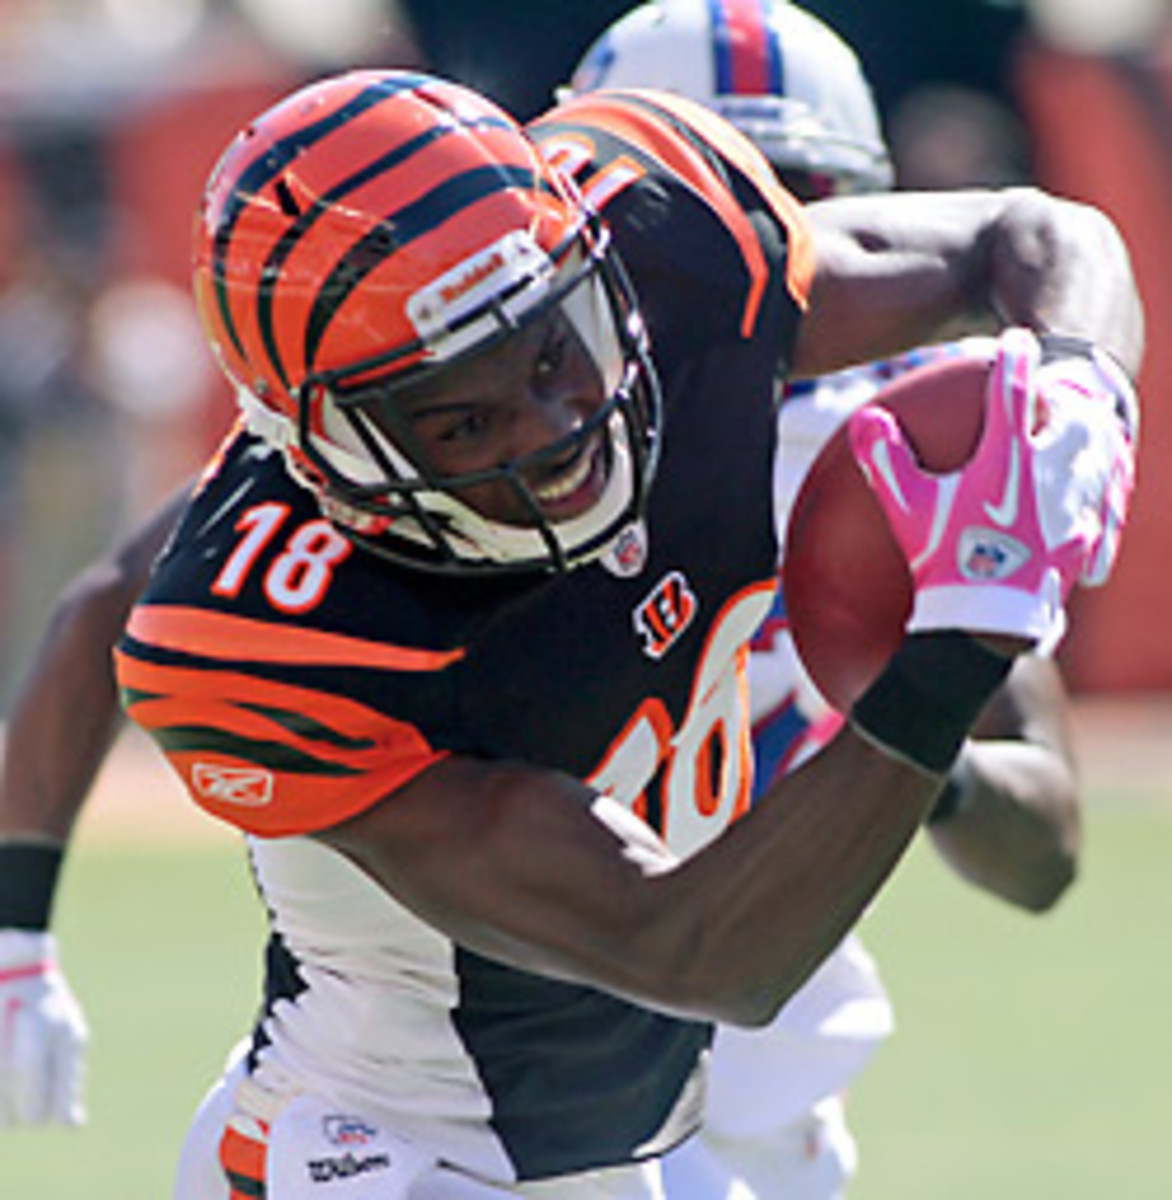 🚀 AJ Green soaring past the Ravens' defense with an INSANE 227-yard p